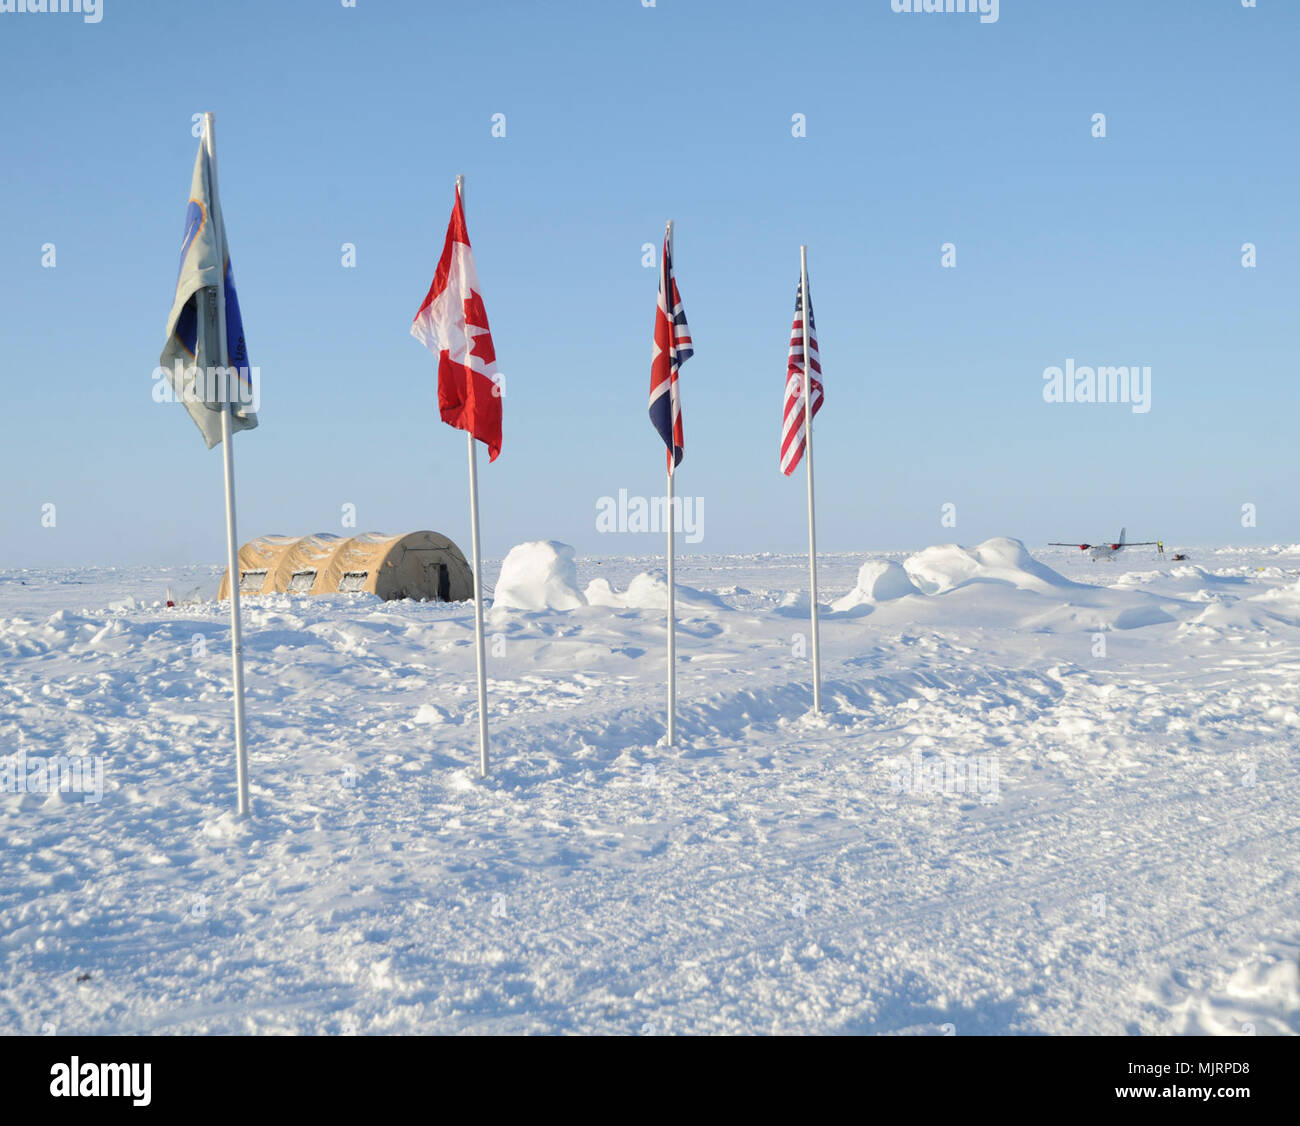 BEAUFORT SEA (March 21, 2018) A flag baring the Ice Camp Skate emblem is followed by flags representing each country participating in Ice Exercise (ICEX) 2018. ICEX 2018 is a five-week exercise that allows the Navy to assess its operational readiness in the Arctic, increase experience in the region, advance understanding of the Arctic environment, and continue to develop relationships with other services, allies and partner organizations. Armed Forces and civilians displaying courage bravery dedication commitment and sacrifice Stock Photo